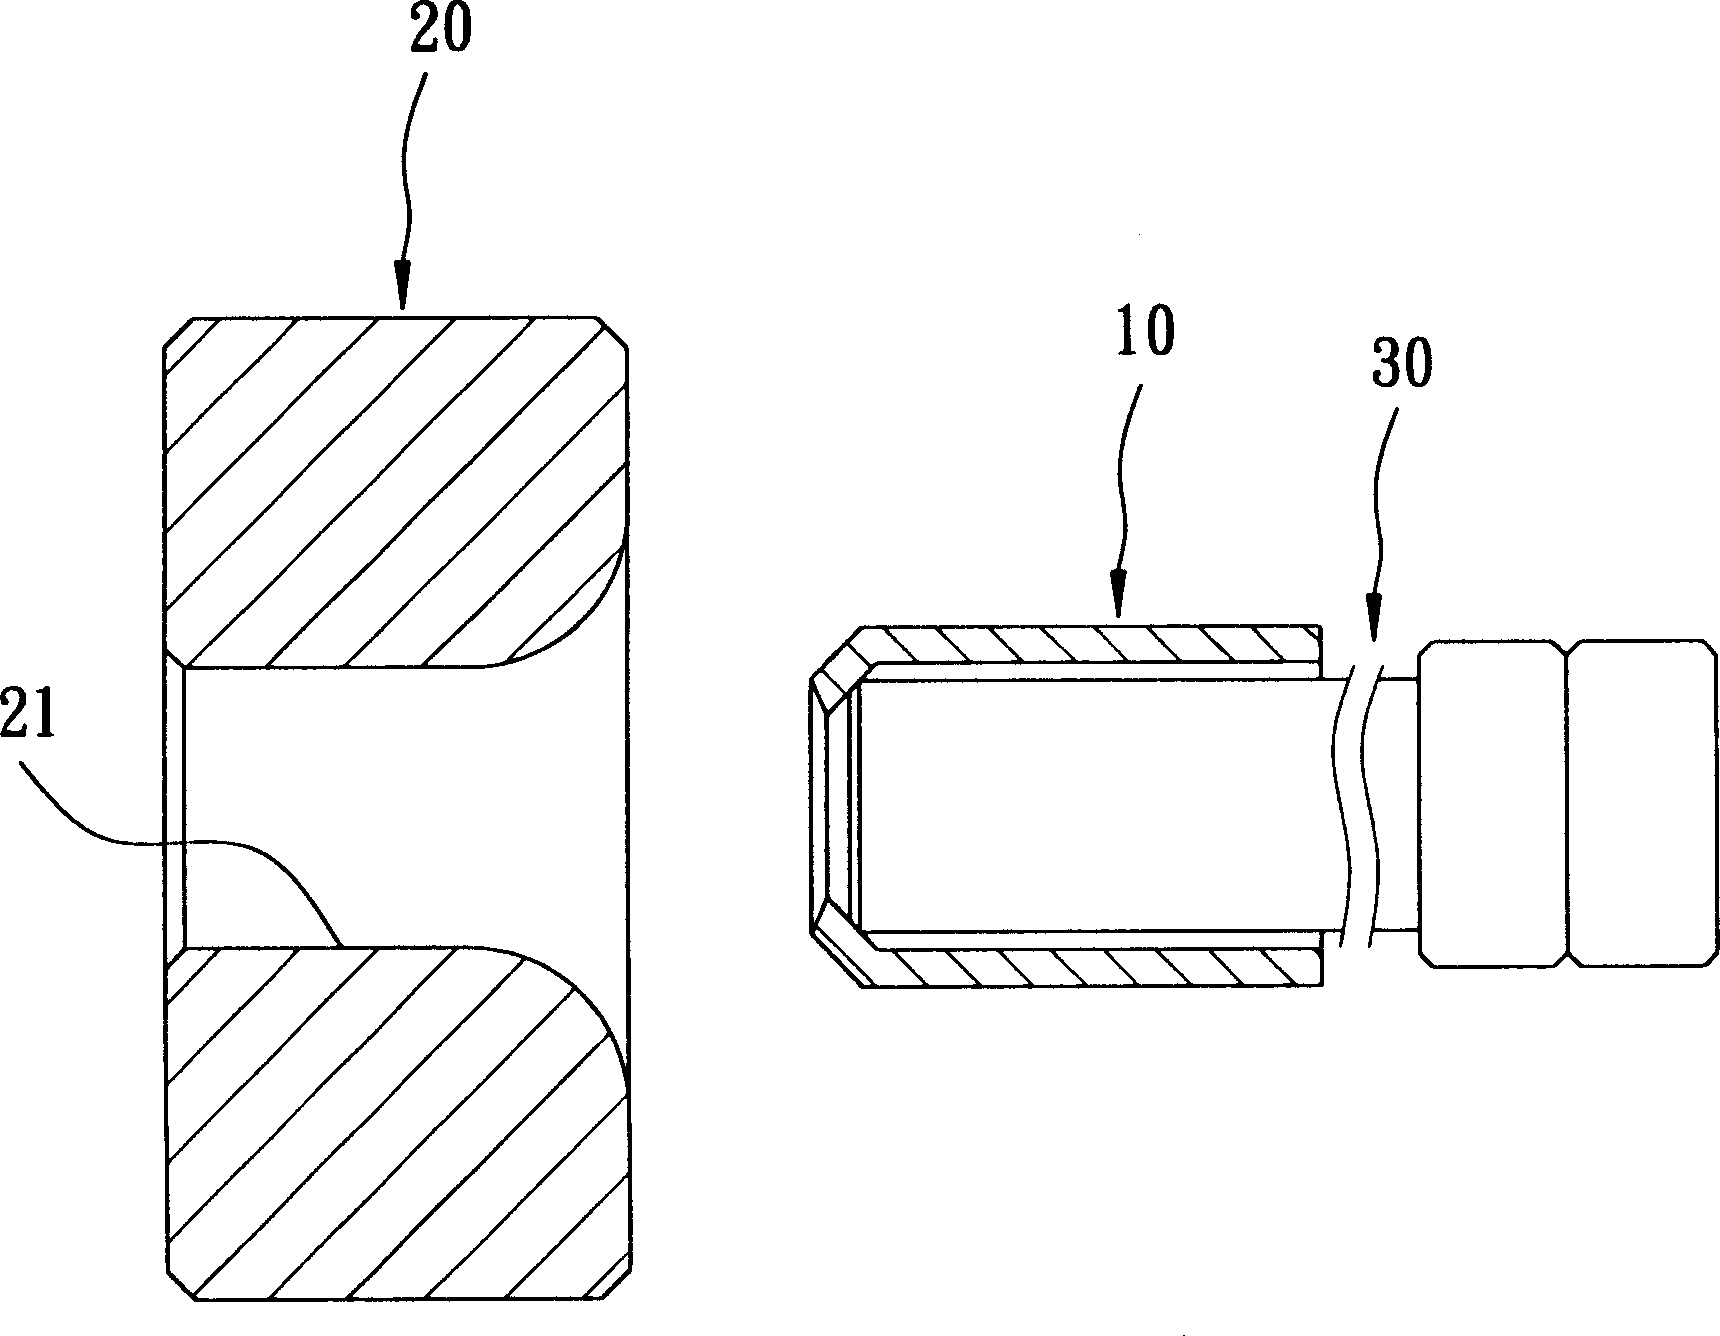 Method for producing aluminium by colol extrusion